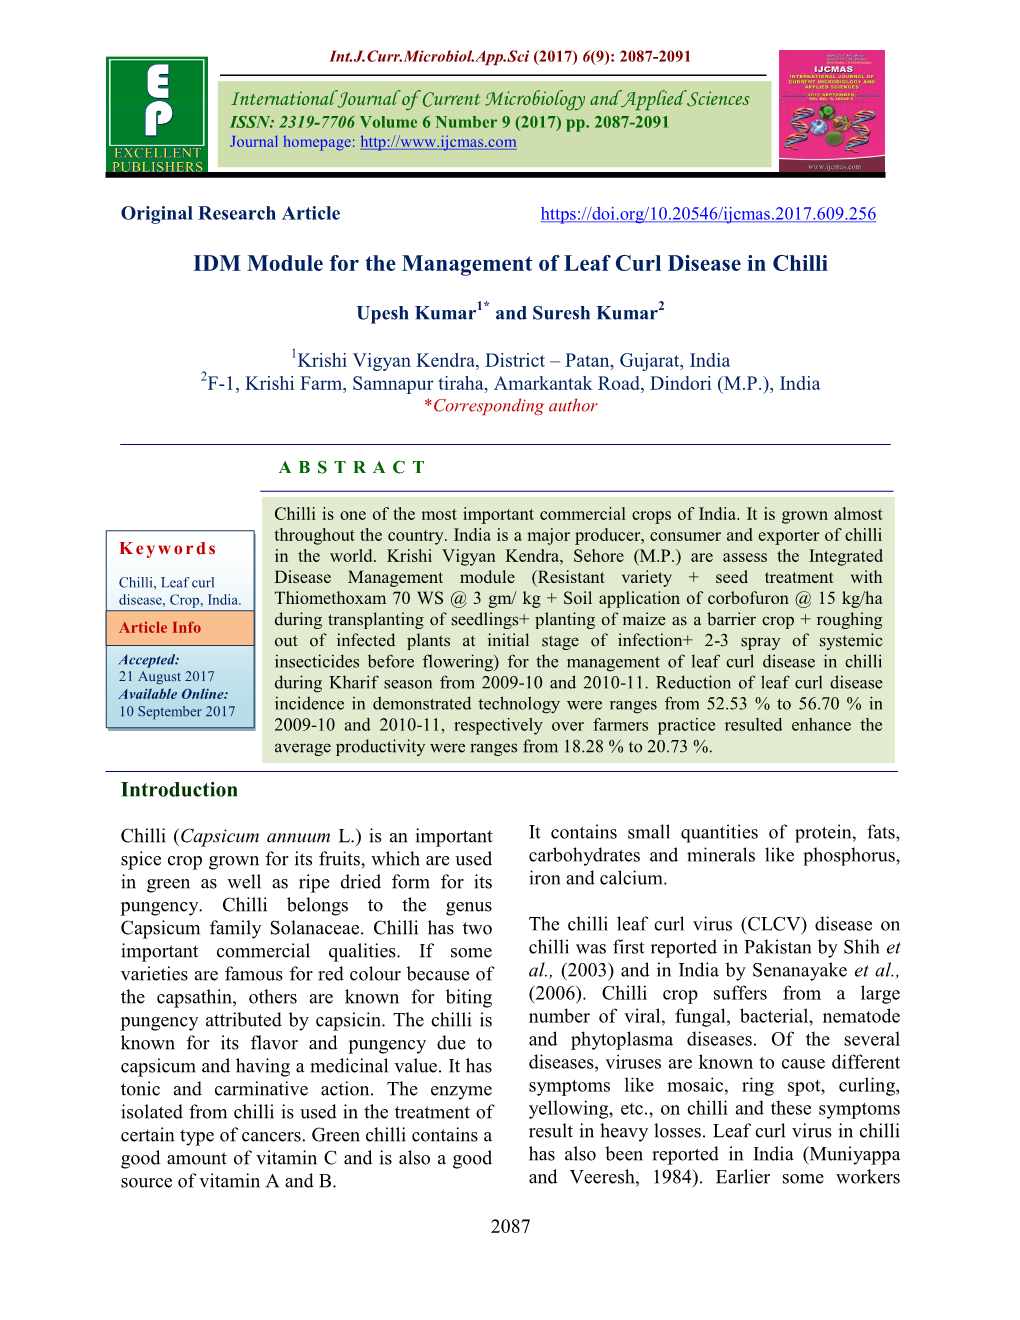 IDM Module for the Management of Leaf Curl Disease in Chilli